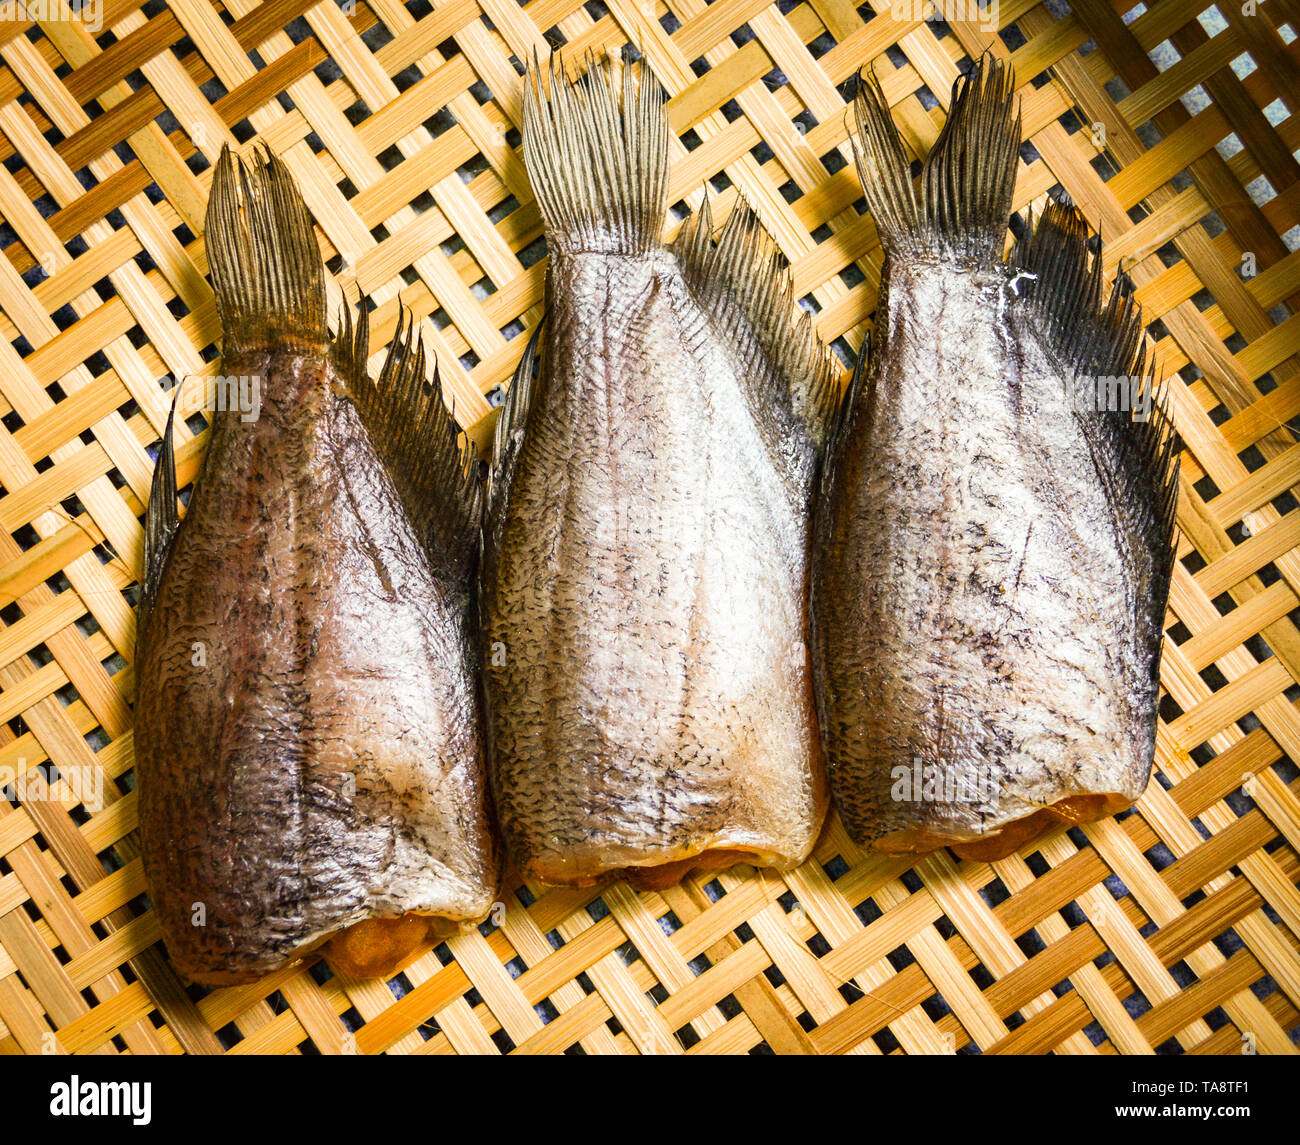 Sun dried fish / trichogaster pectoralis fish dry with spawn on bamboo basket Stock Photo